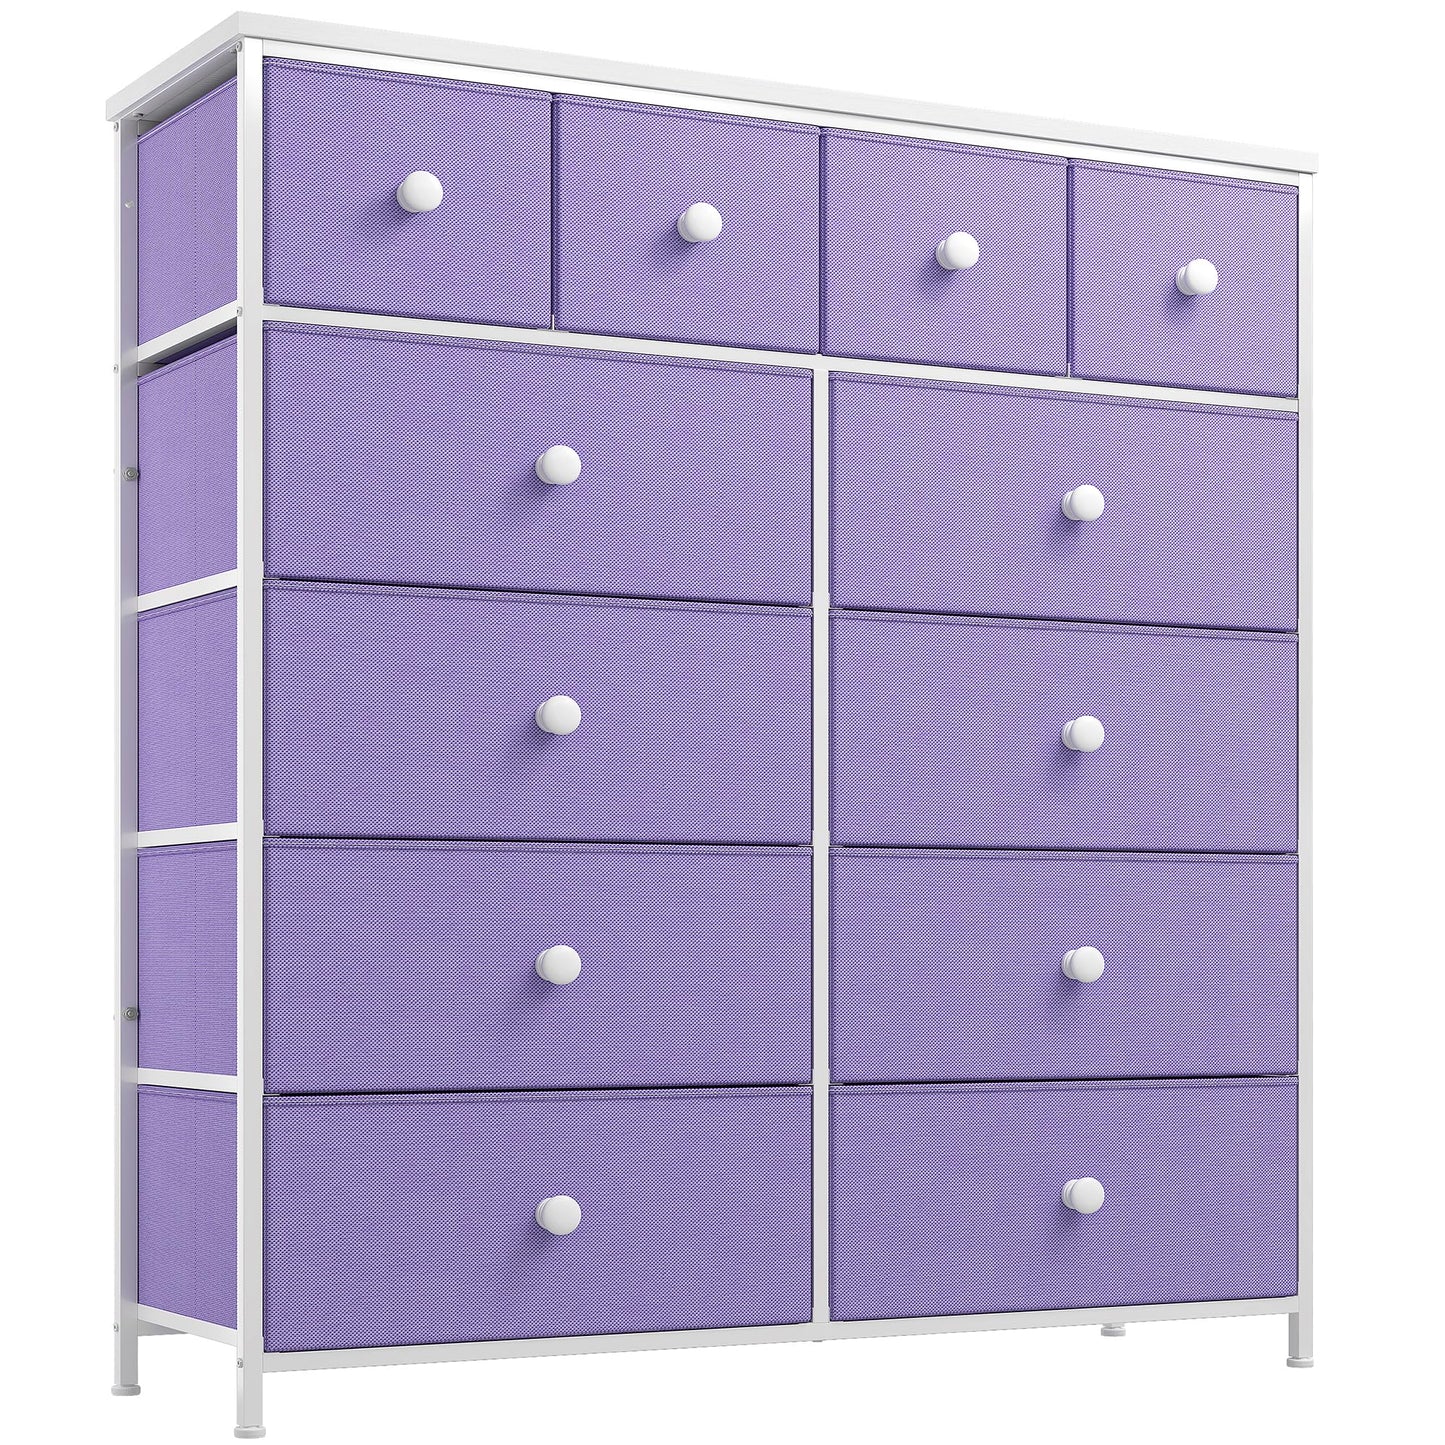 Hana Exports Pink Dresser for Girls Bedroom with 12 Drawers, Dresser for Bedroom with Sturdy Metal Frame and Wooden Top, Bedroom Dressers & Chests of Drawers for Bedroom, Nursery, Closet, Pink